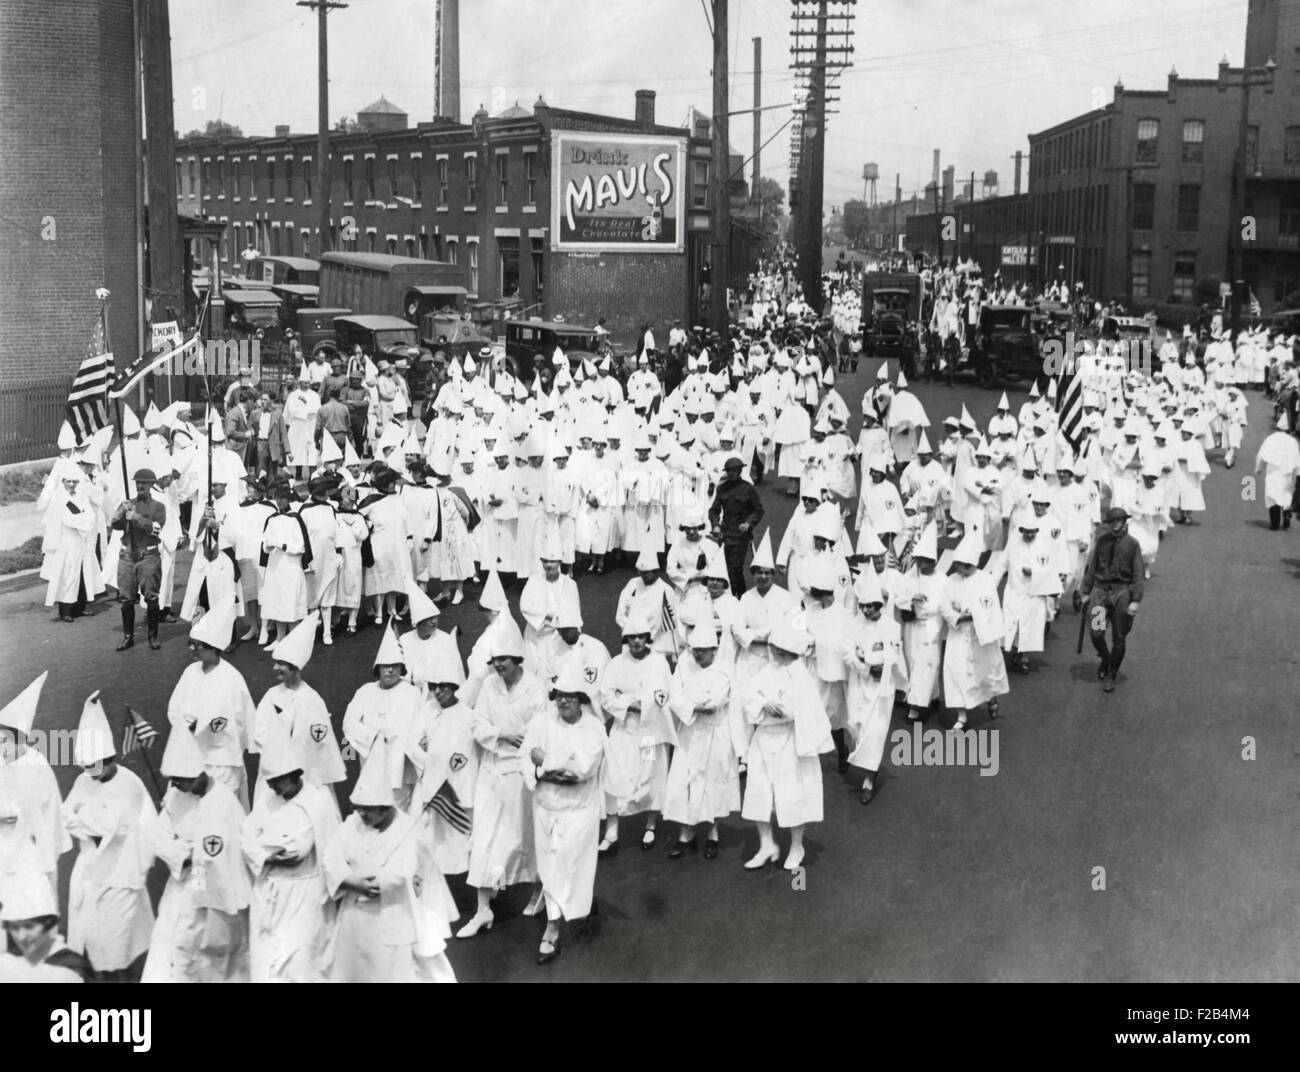 Ku Klux Klan parade in an unidentified American city. In the 1920s the Klan presented itself as a fraternal organization, and expanded its animosity beyond African Americans, to include Catholics, Jews and foreigners. It promoted Christian fundamentalism, patriotism and white supremacy. - (BSLOC 2015 1 204) Stock Photo